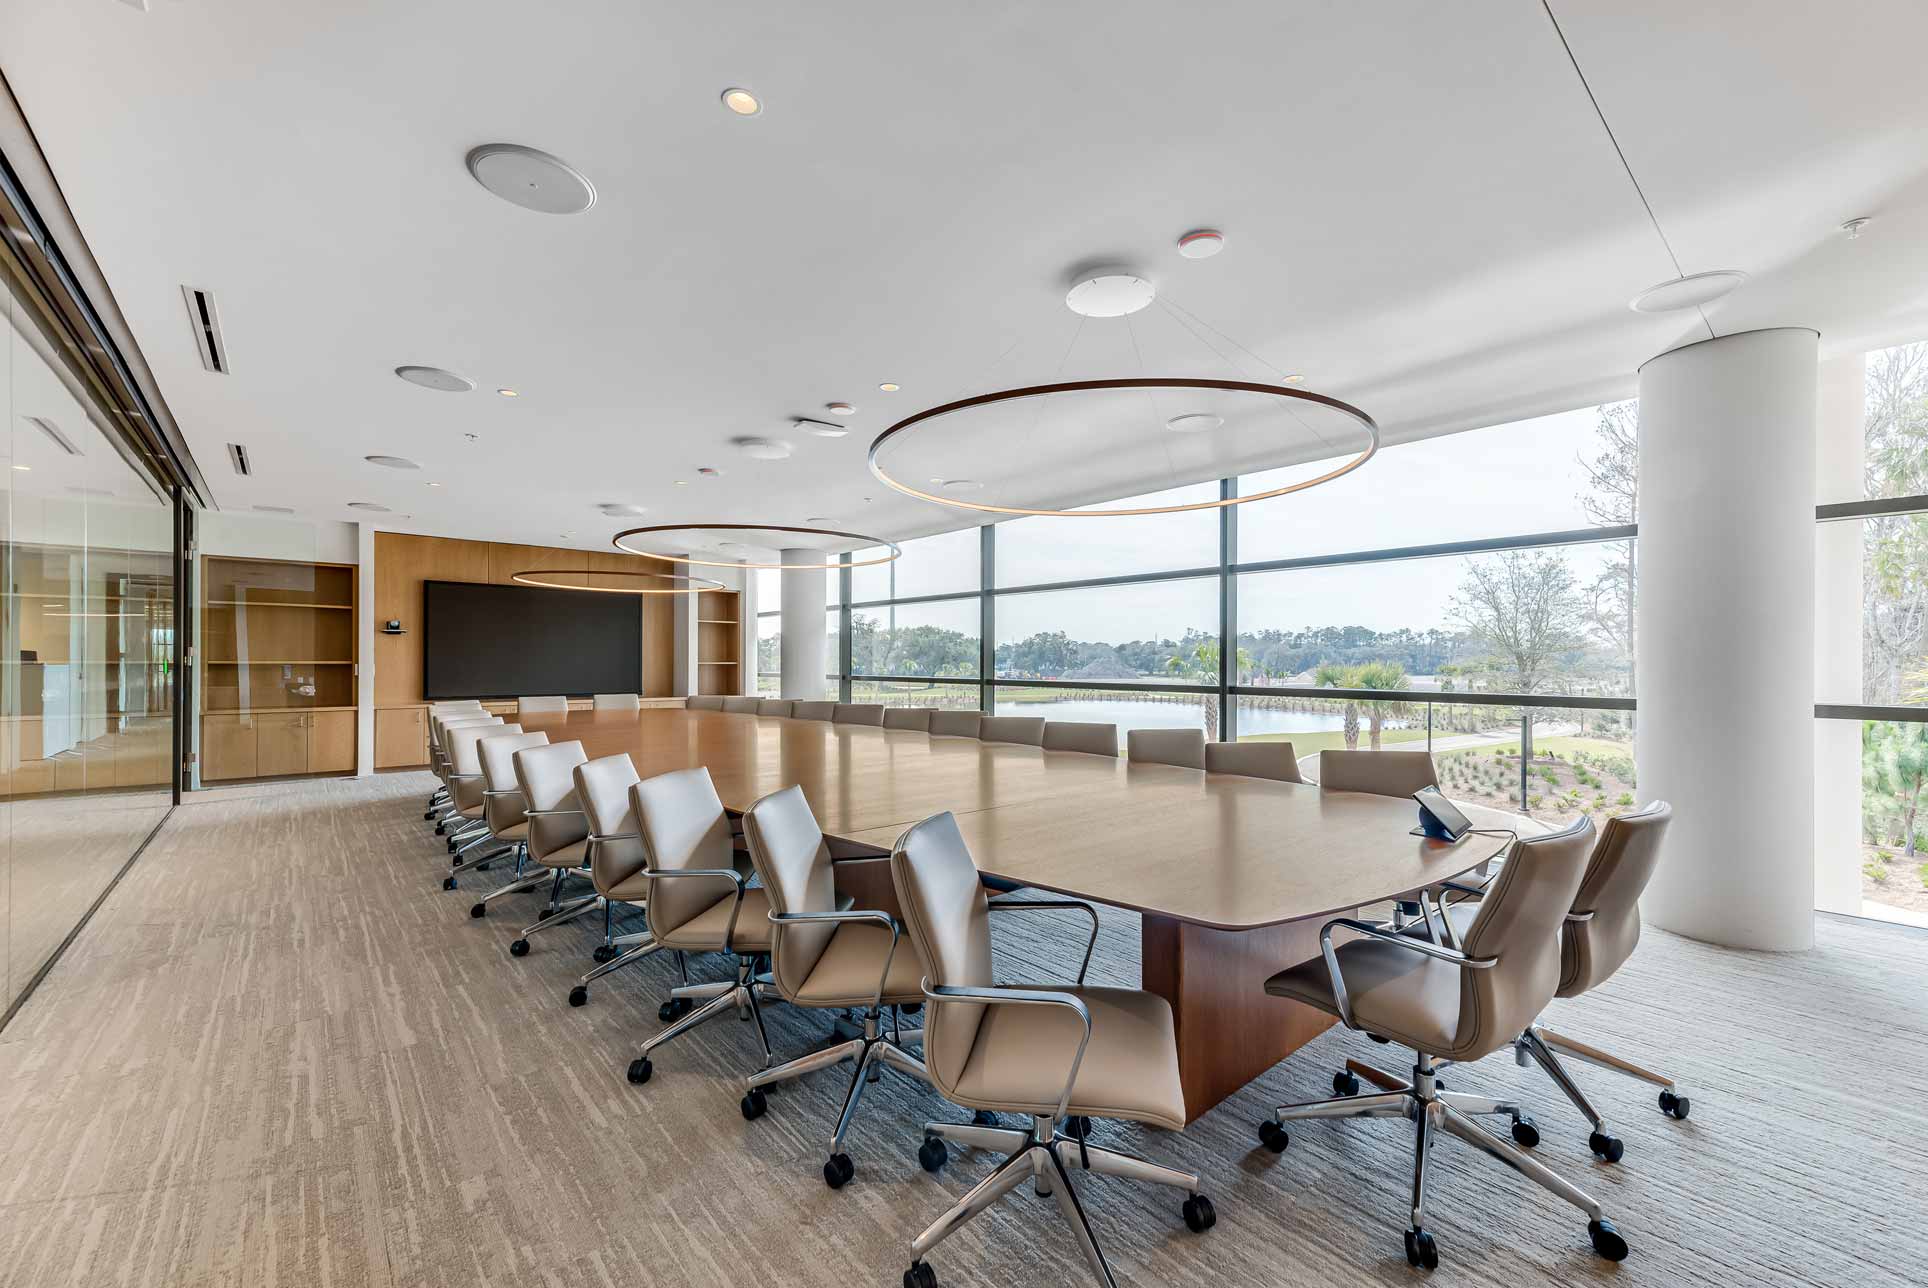 A large wooden conference room with 28 leather rolling chairs lining it. Daylight and Occupancy sensors are visible in the ceiling and the lush landscaping of the grounds are visible through the glass exterior wall. Hanging over the table are statement circular pendants.